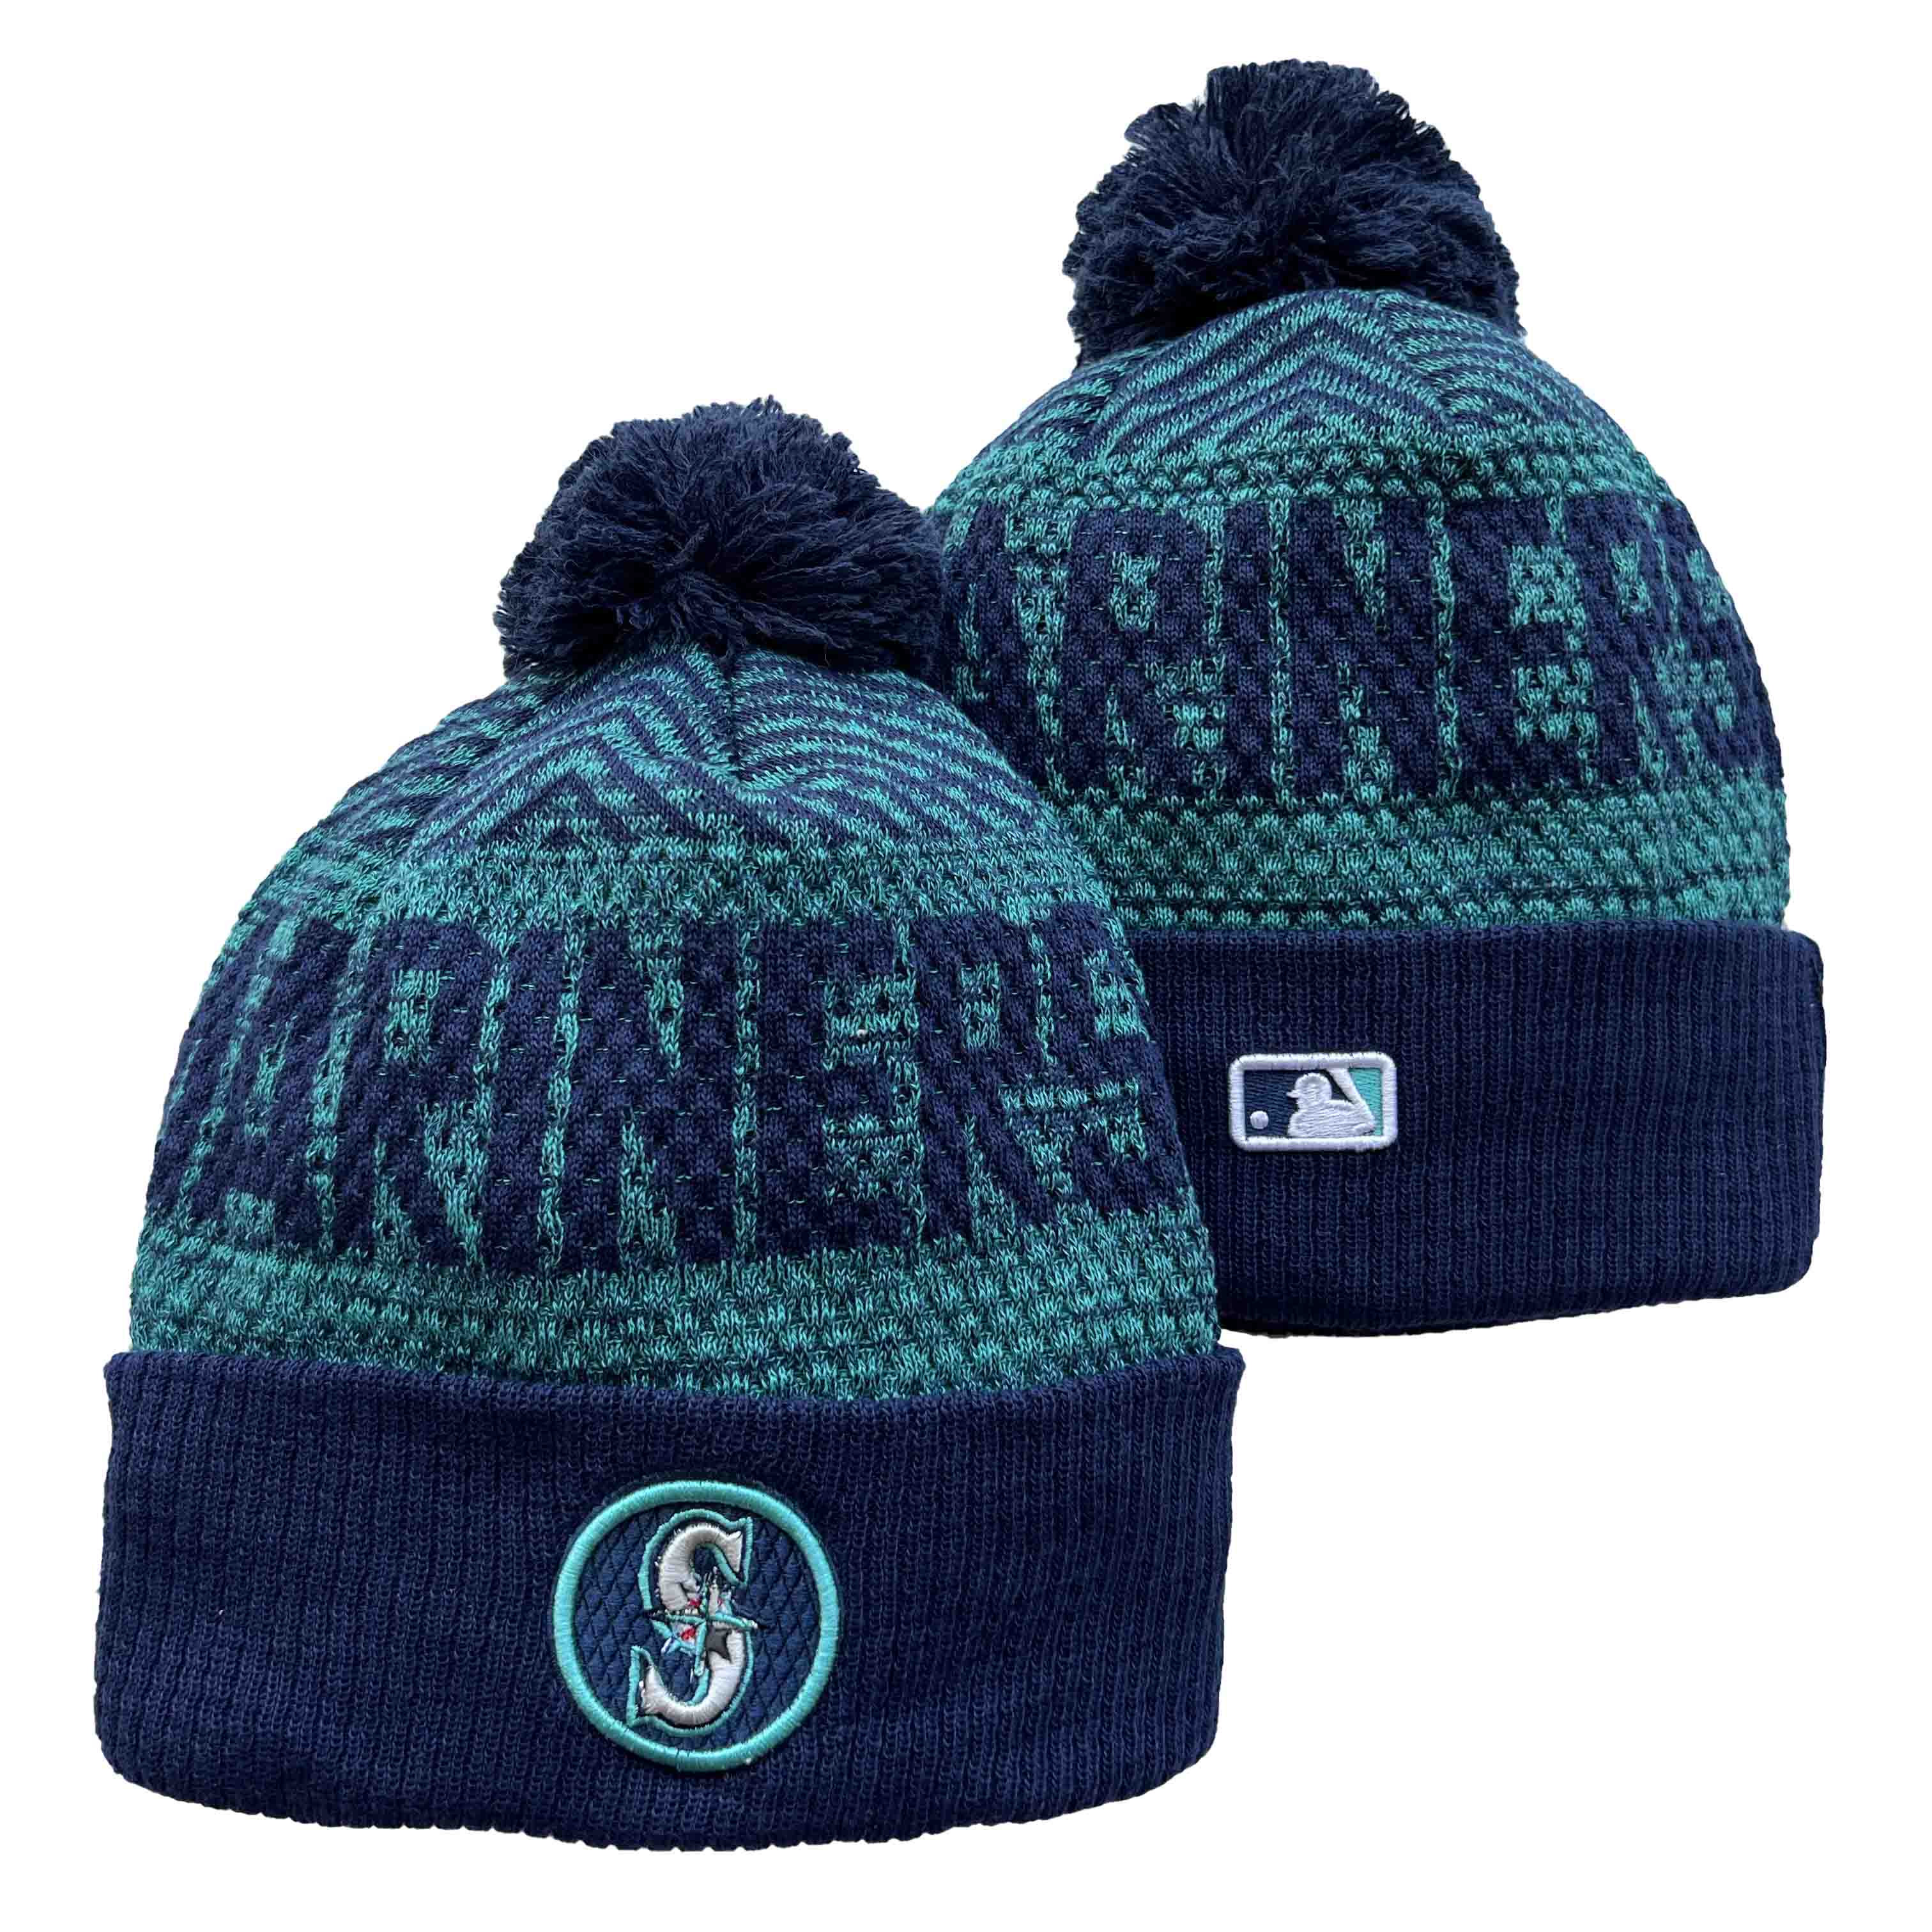 MLB Seattle Mariners Beanies Knit Hats-YD155